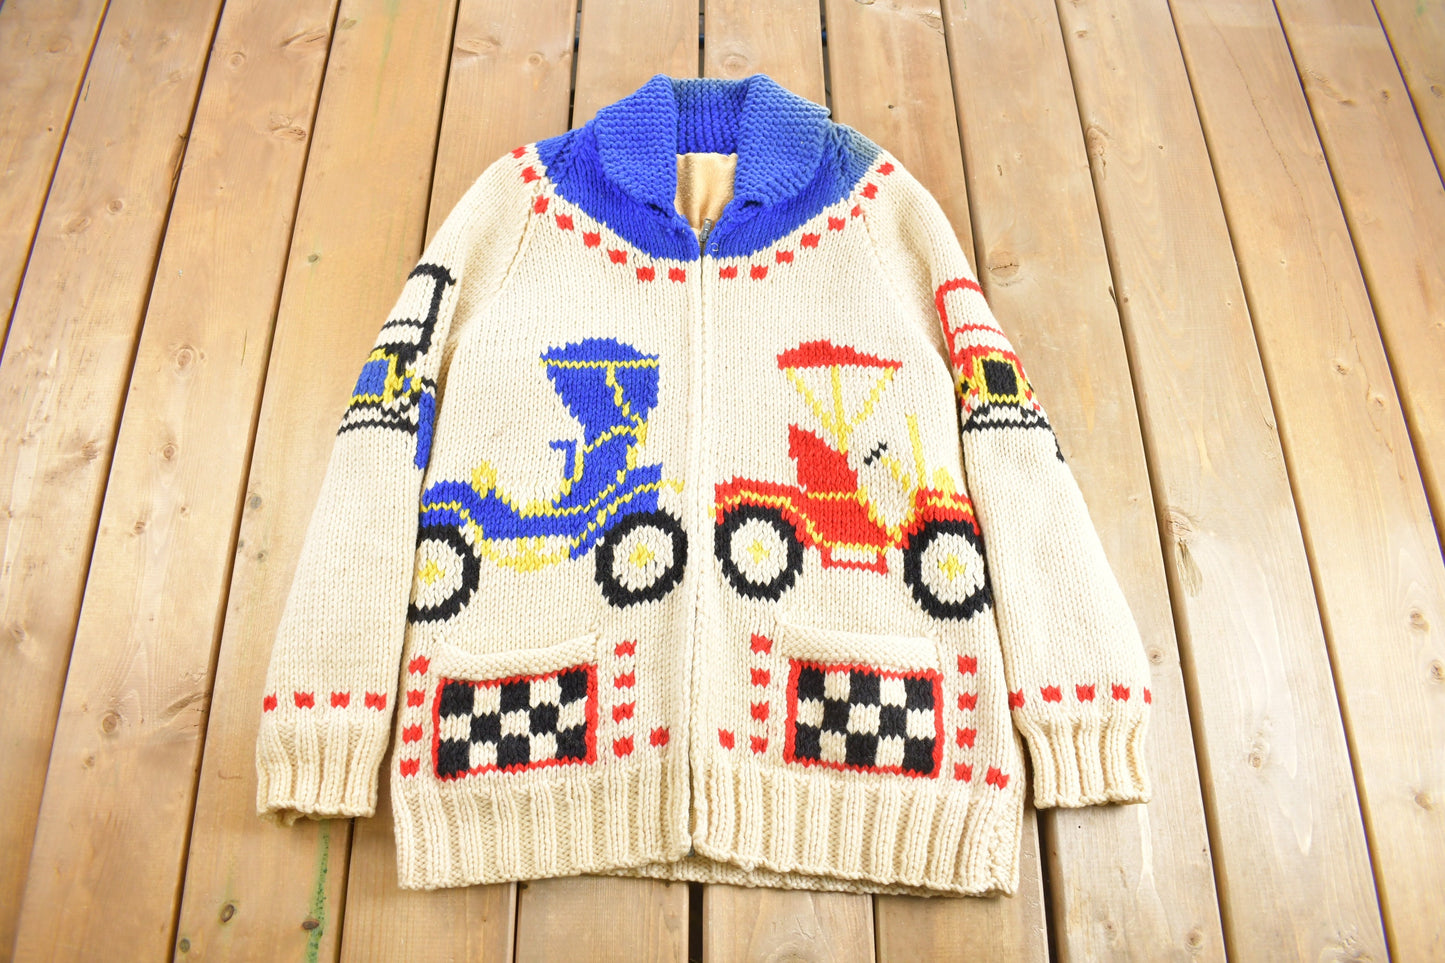 Vintage 1950s Hand-Knit Vintage Car Theme Cowichan Sweater / Wool / True Vintage / Outdoorsman / Heavy Weight / Size M